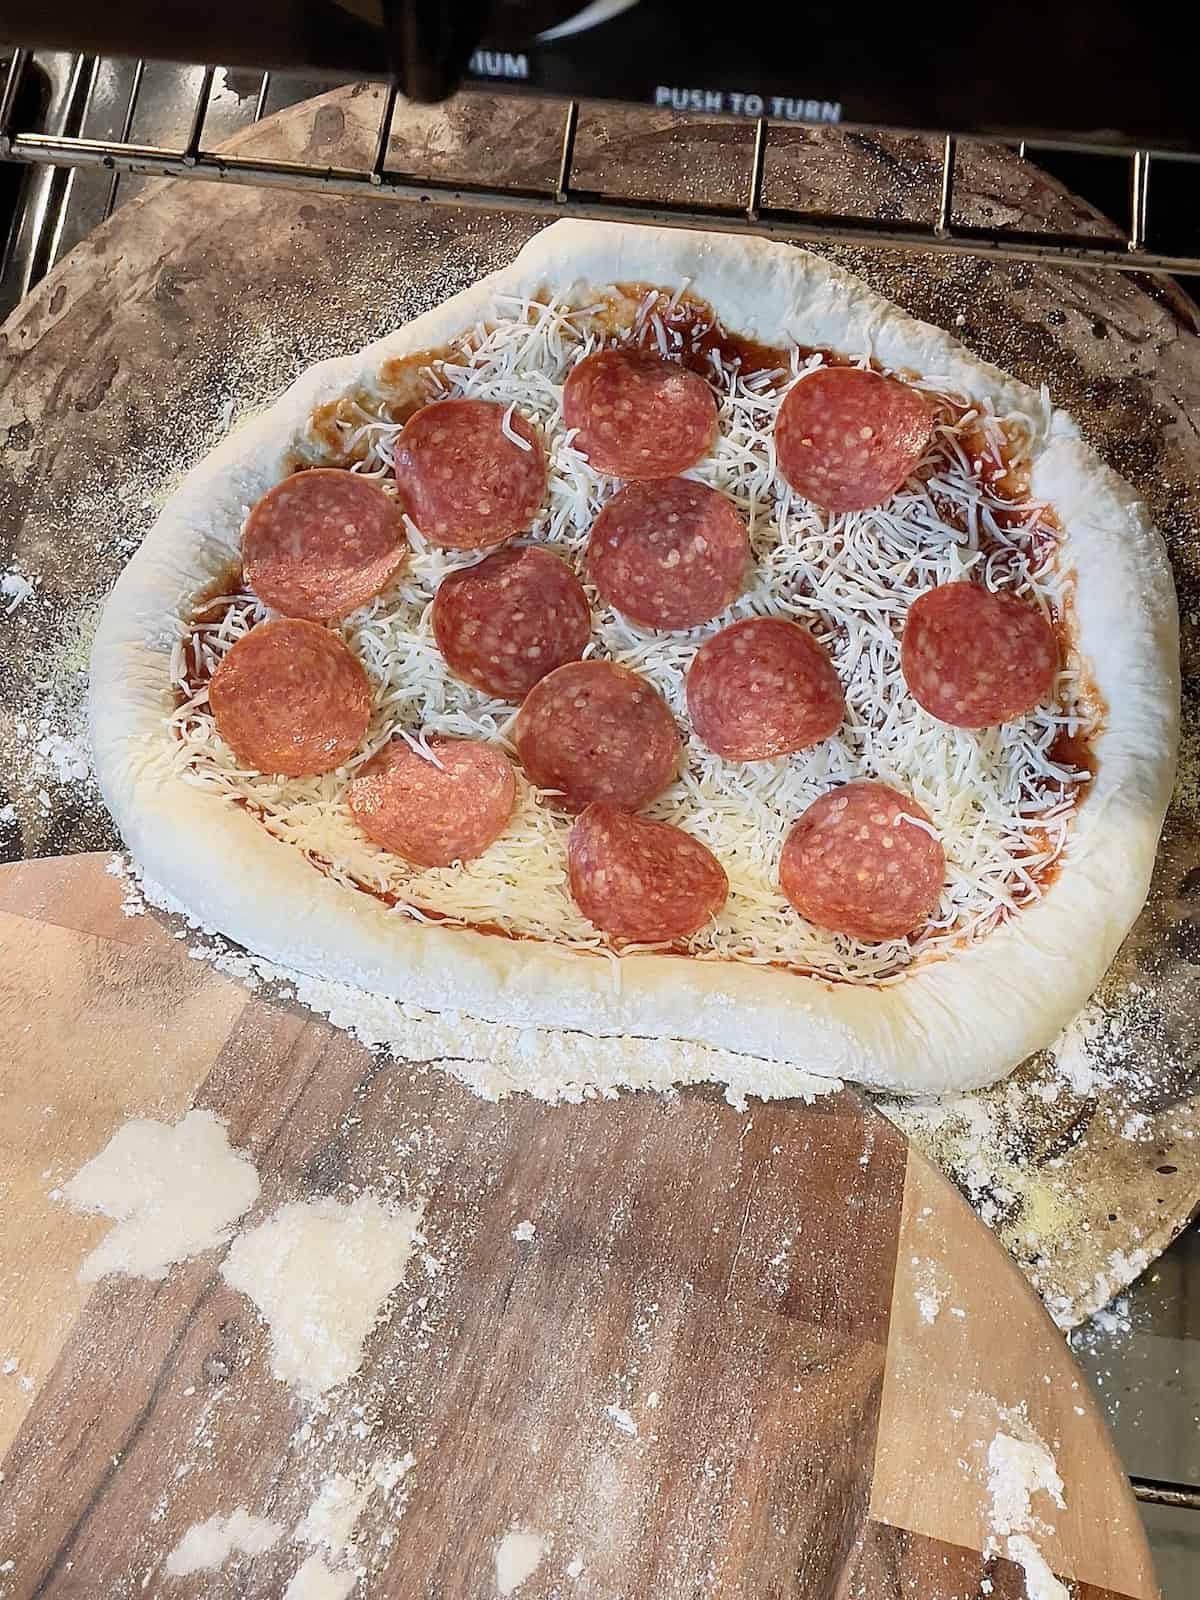 pizza being transferred onto a pizza stone in the oven